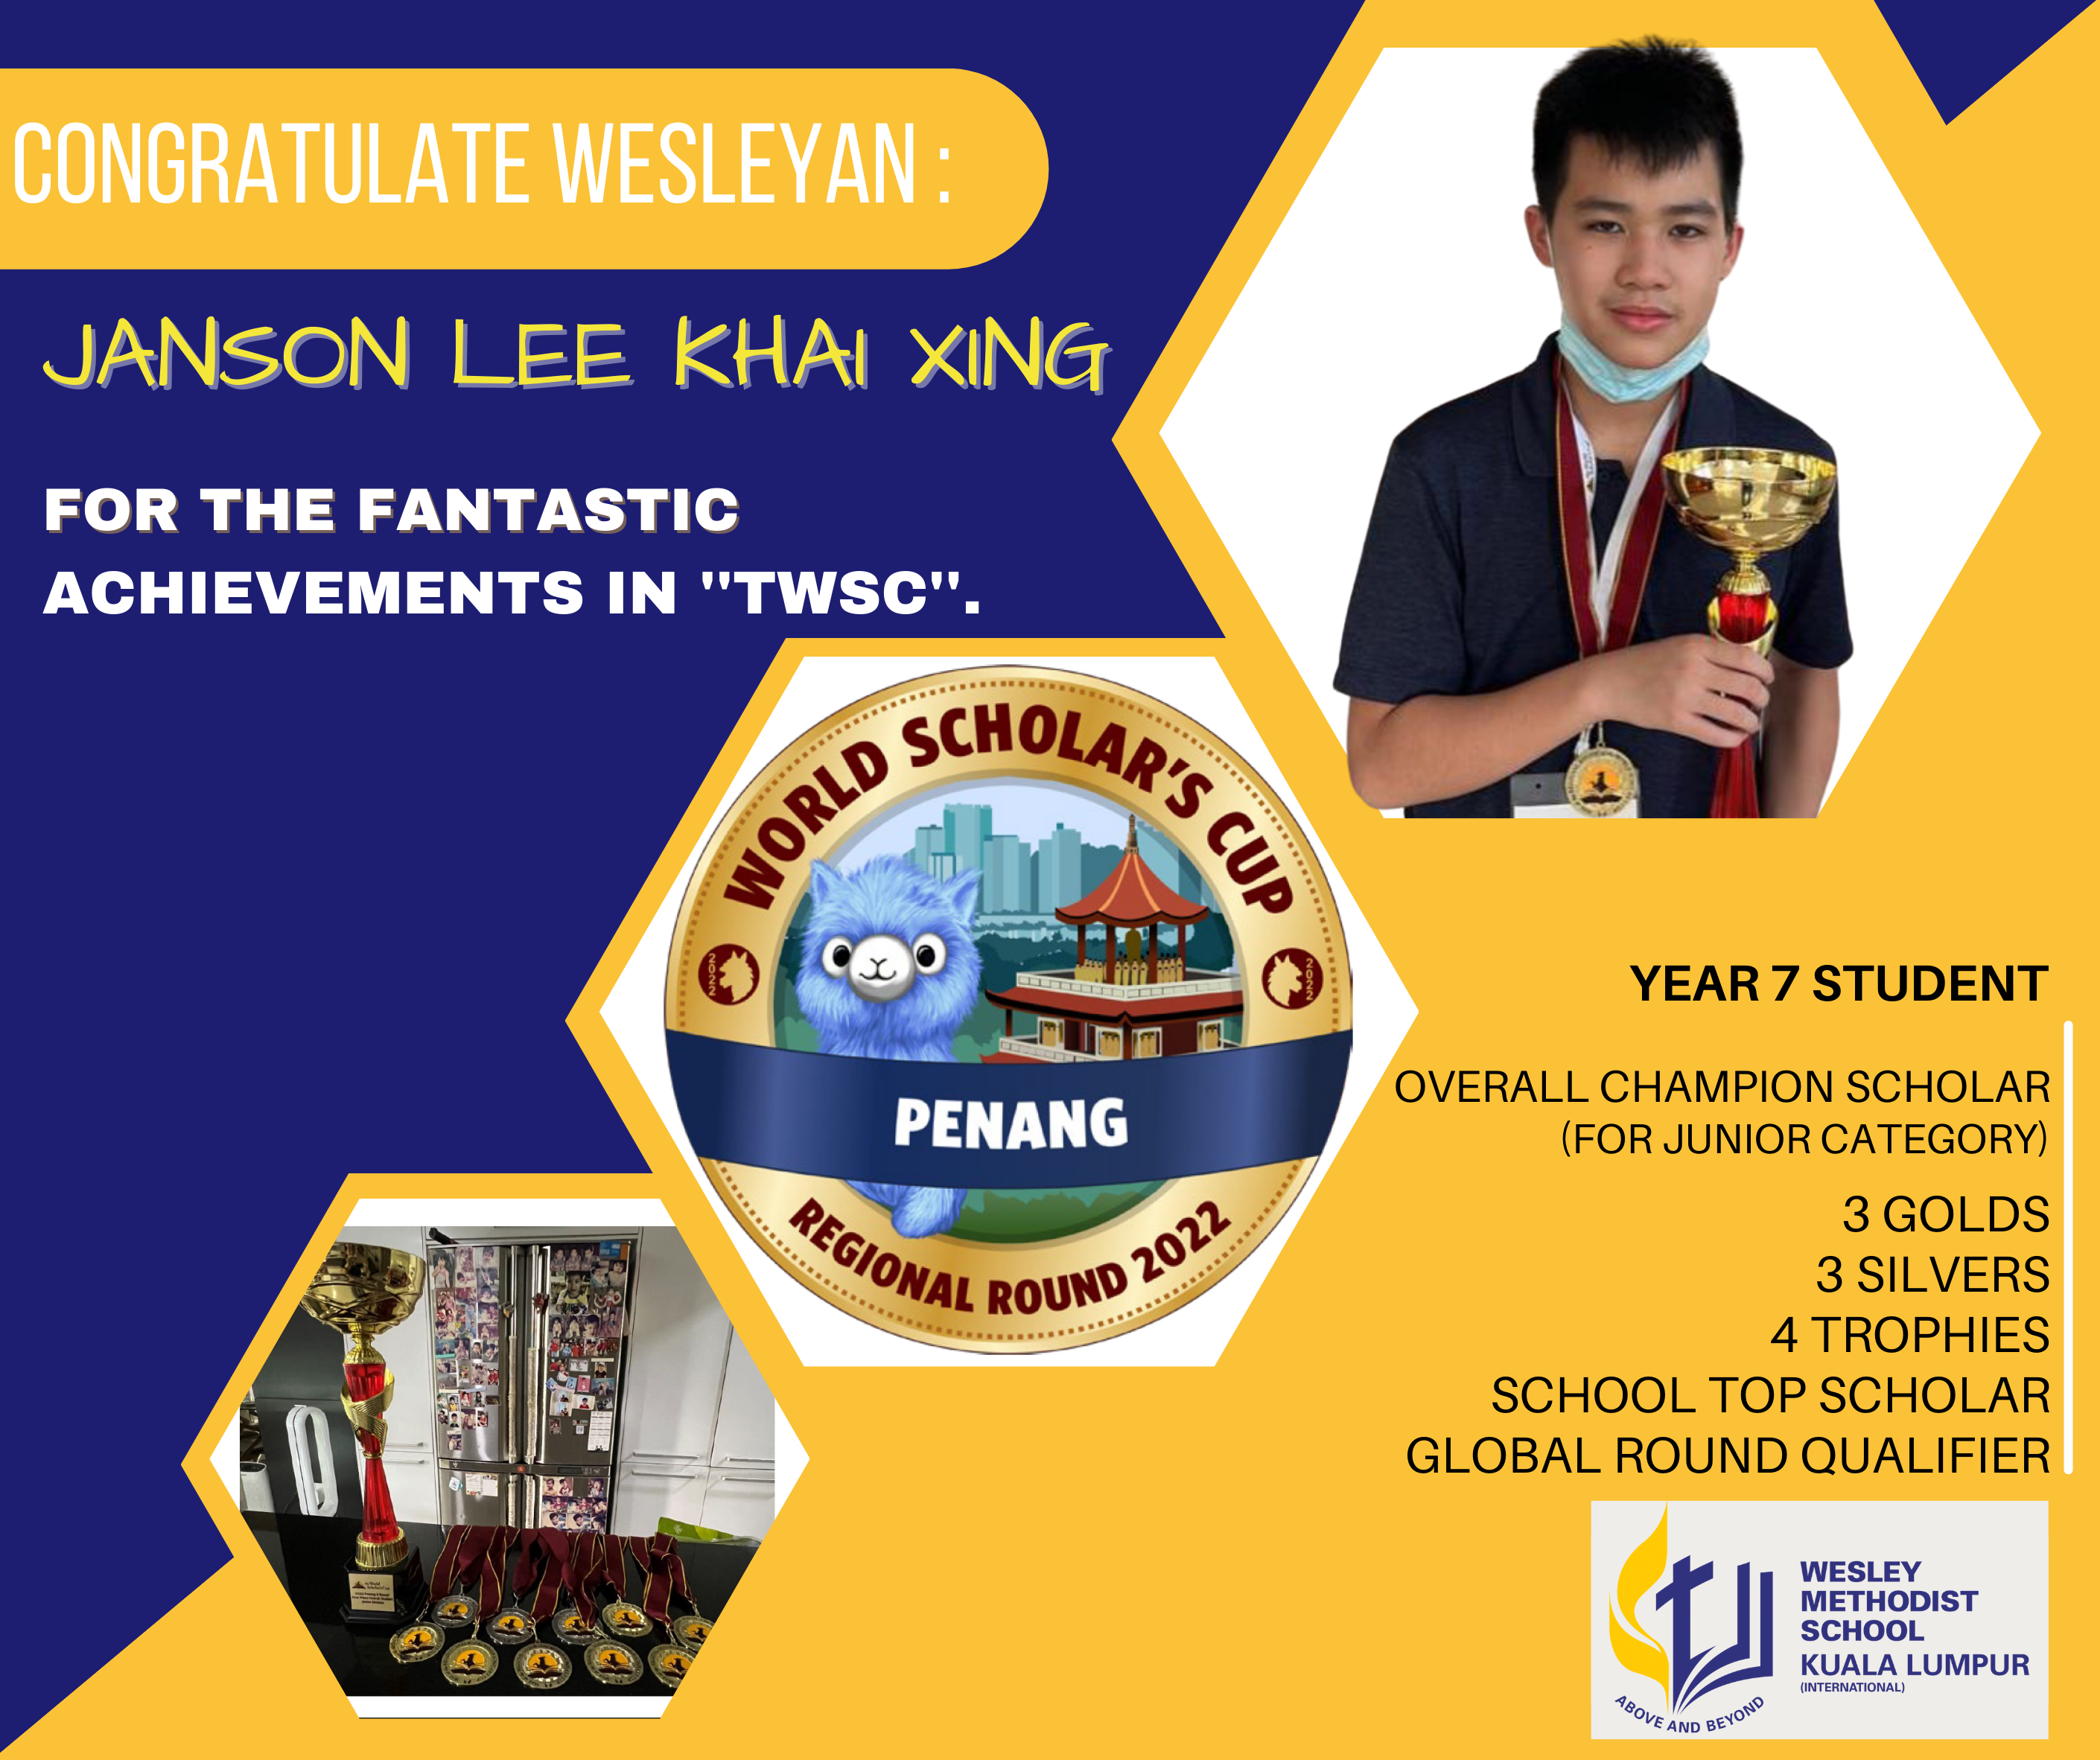 * Overall Champion Scholar (Junior Category) in the World Scholar's Cup Penang II Round 2022